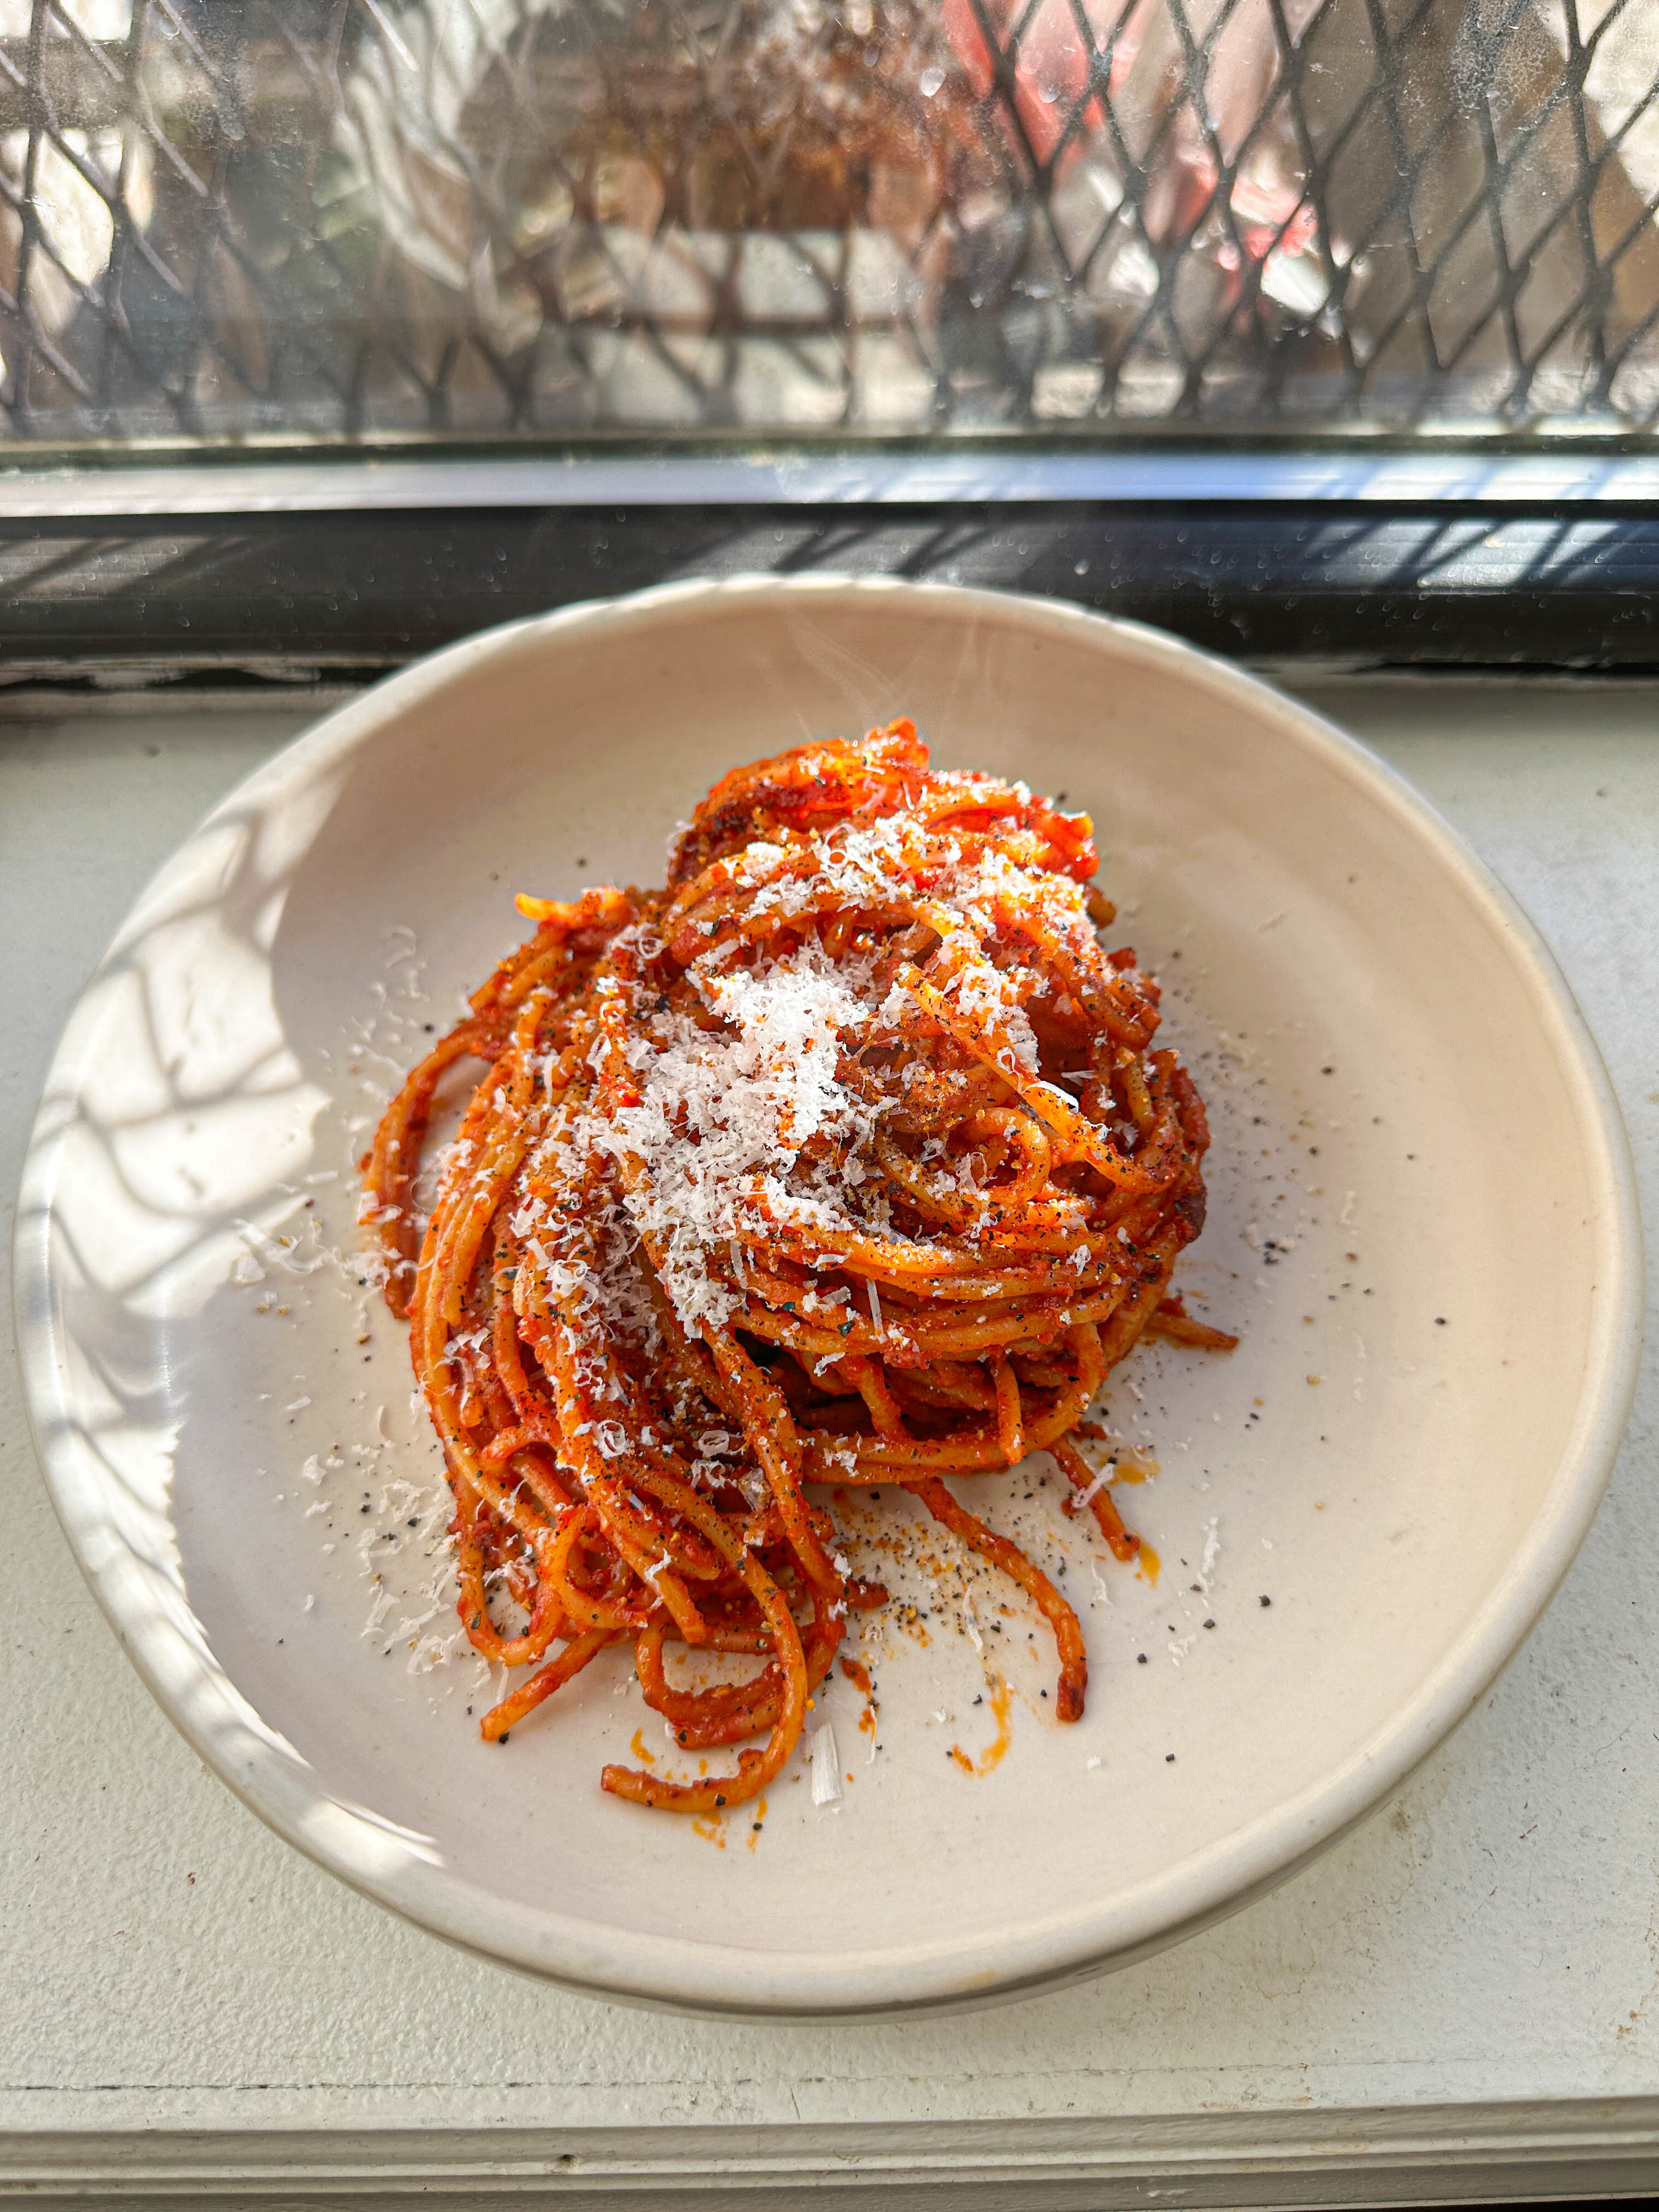 A plate of spaghetti with tomato sauce and grated cheese on a windowsill